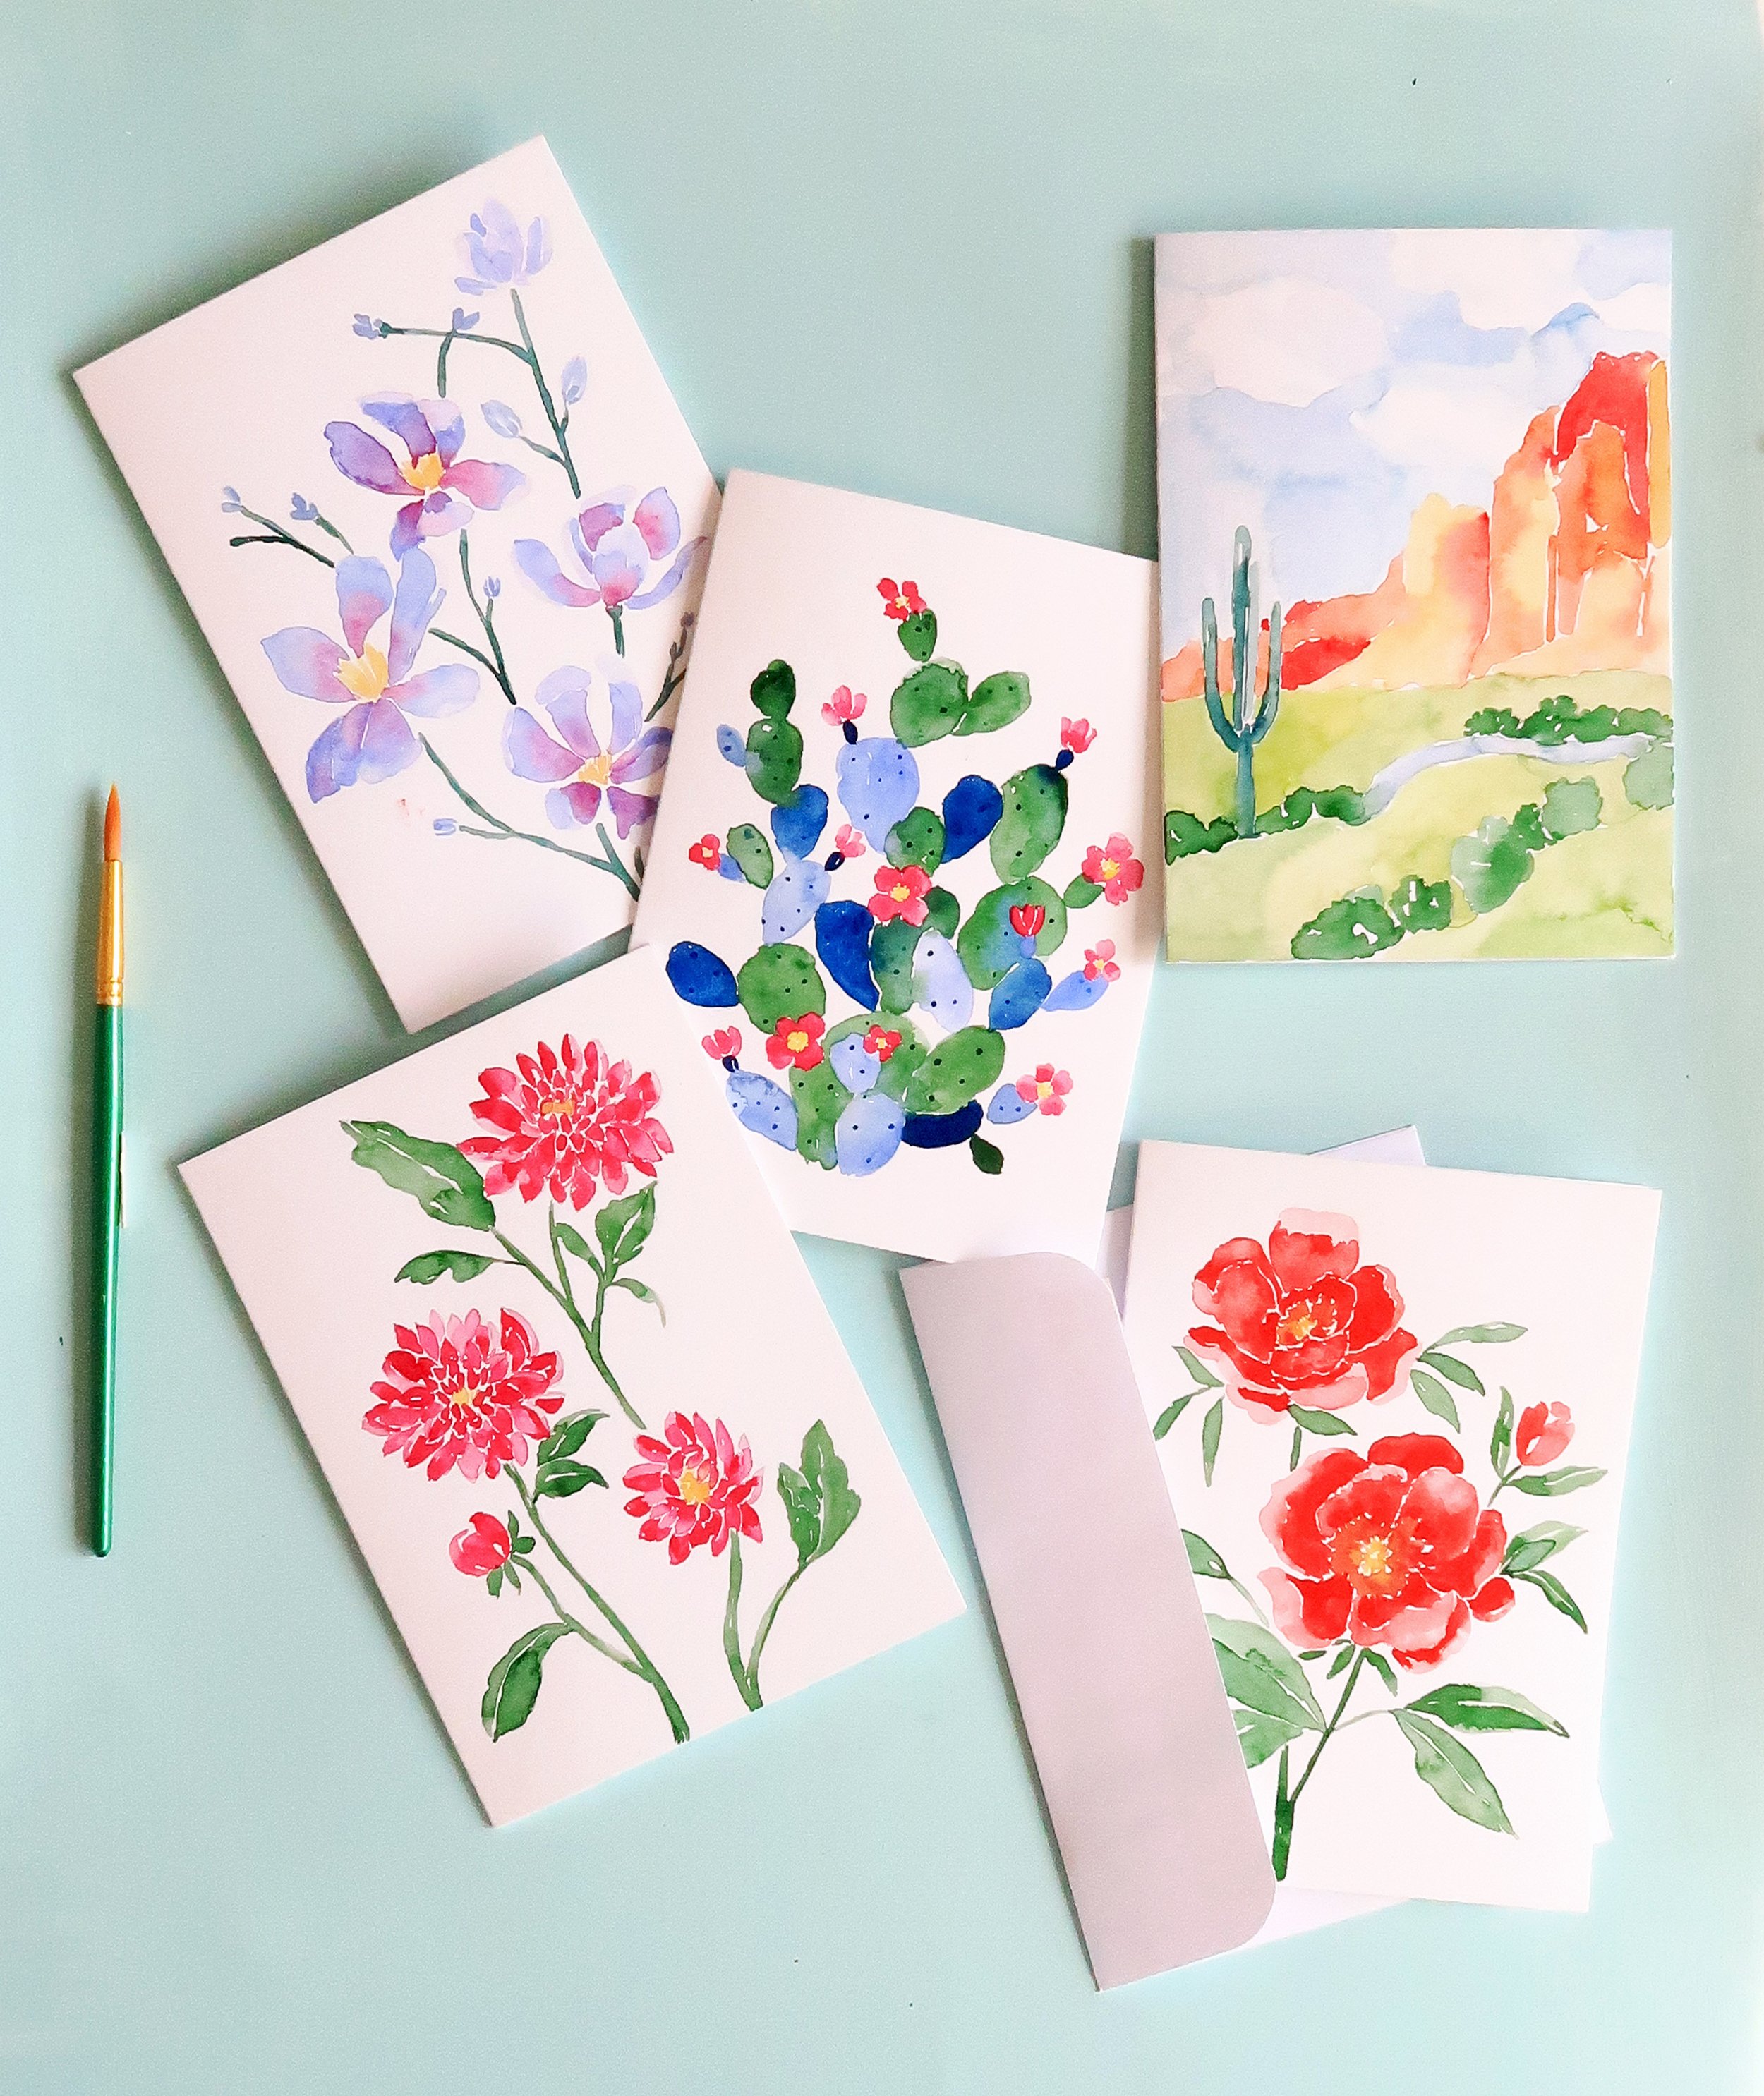 Colorful Watercolor Floral Birthday Greeting Card, Blank Inside - The  Painted Pen